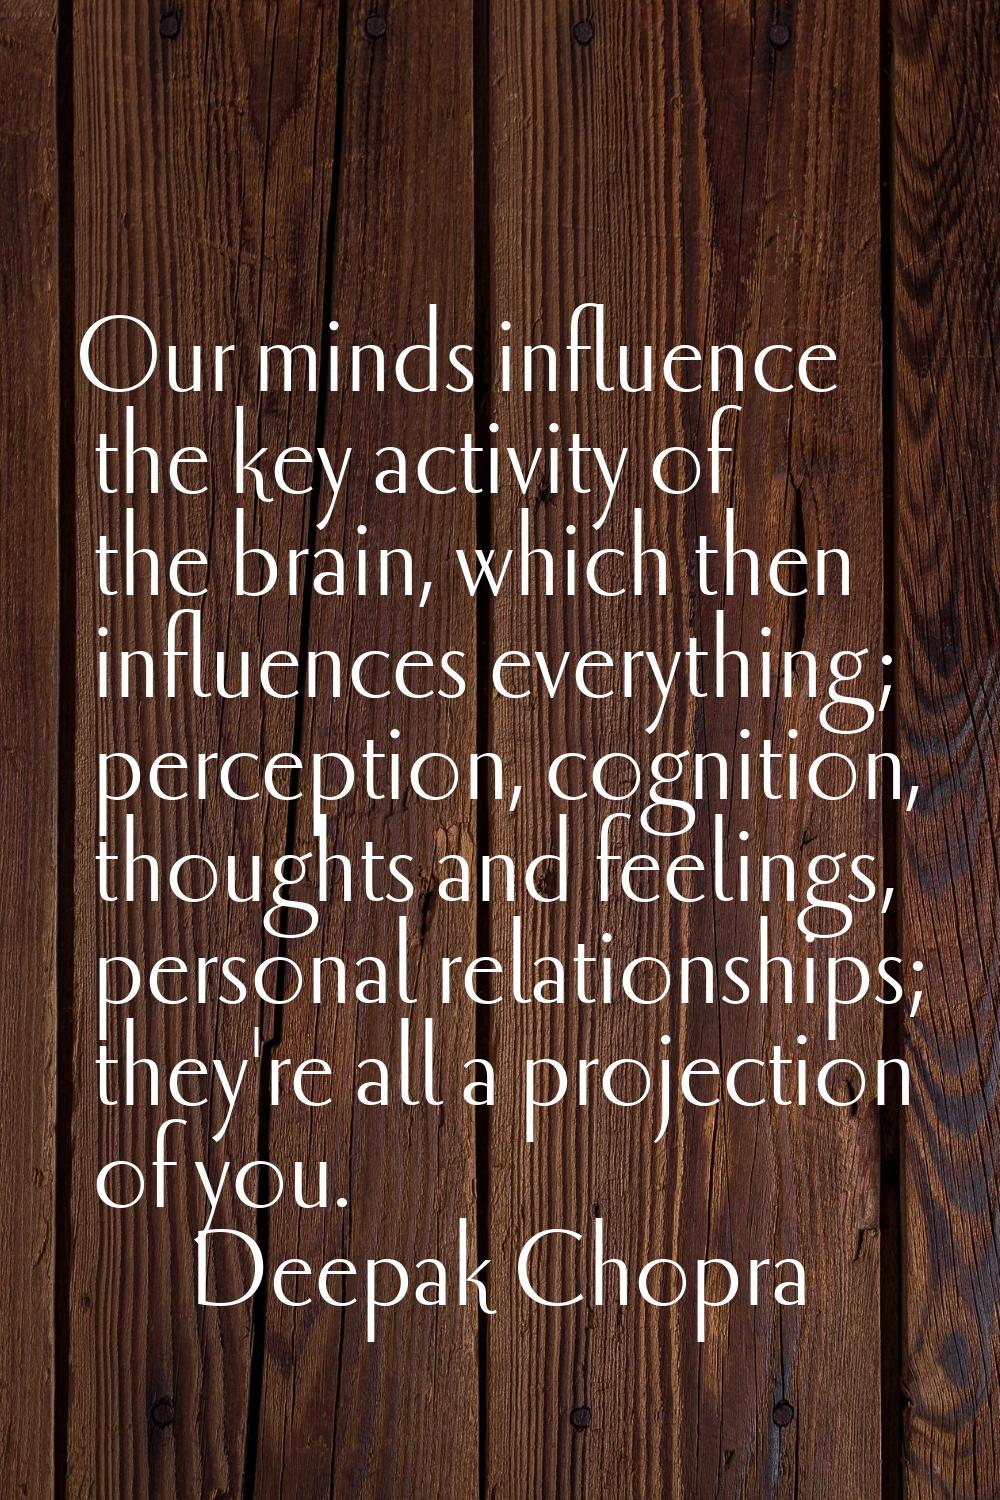 Our minds influence the key activity of the brain, which then influences everything; perception, co